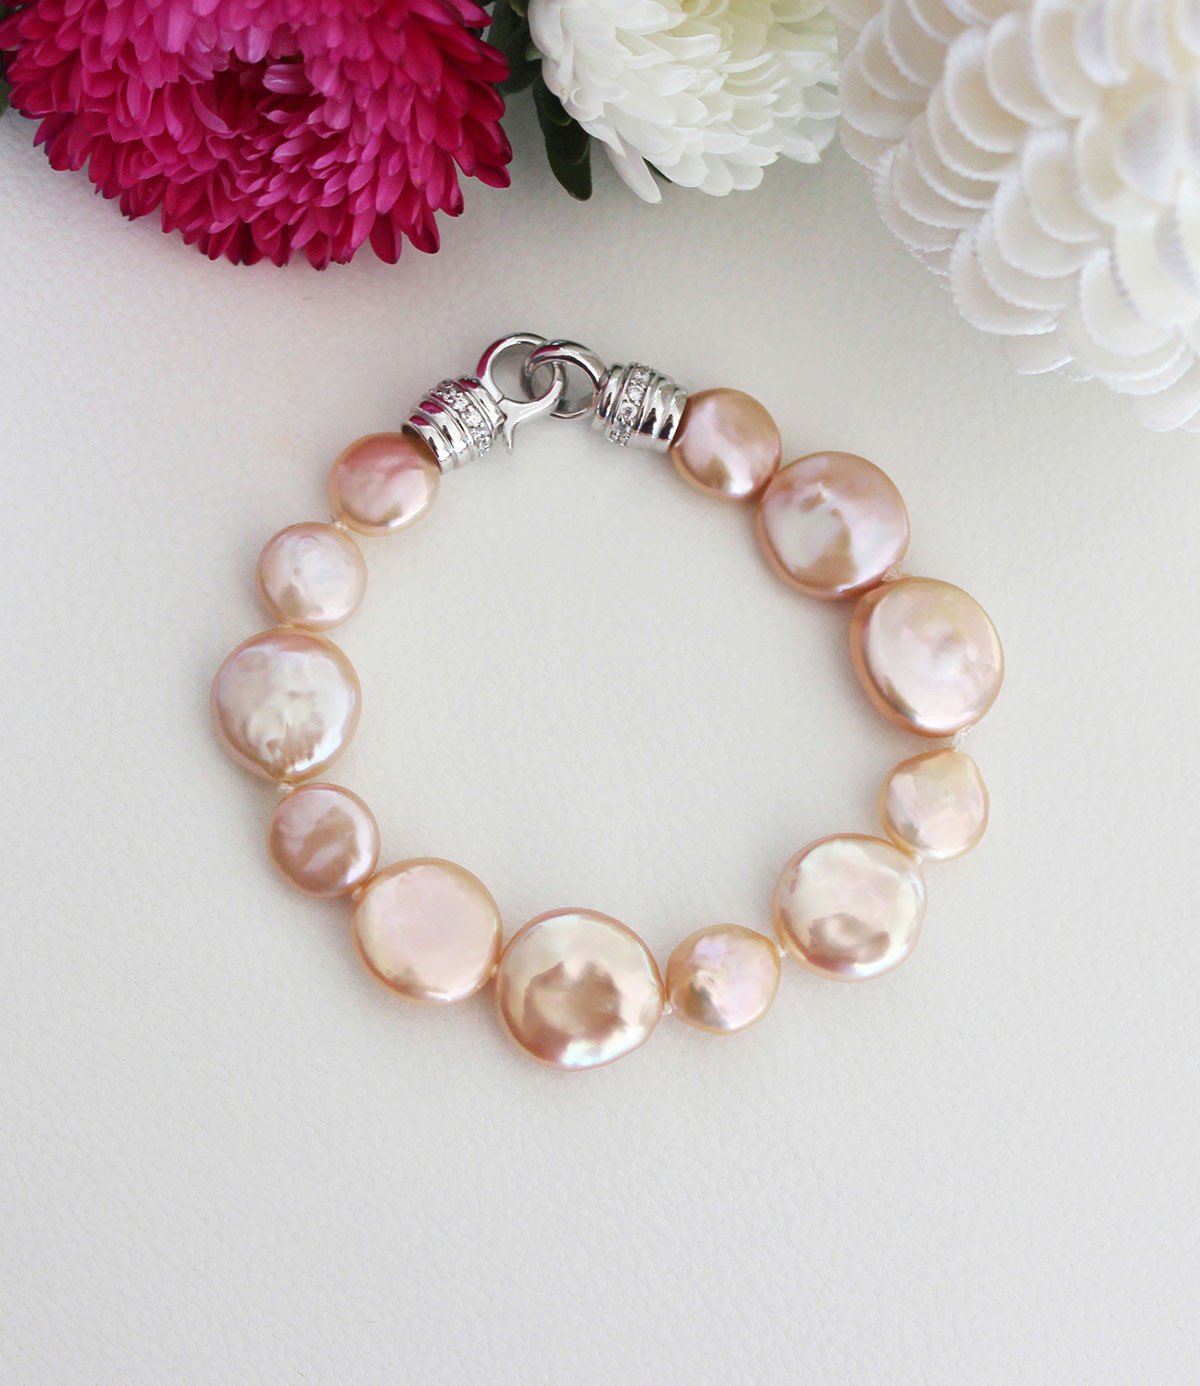 Pearl Bracelet with Rhodium Plated Sterling Silver Freshwater Peach Baroque Pearls